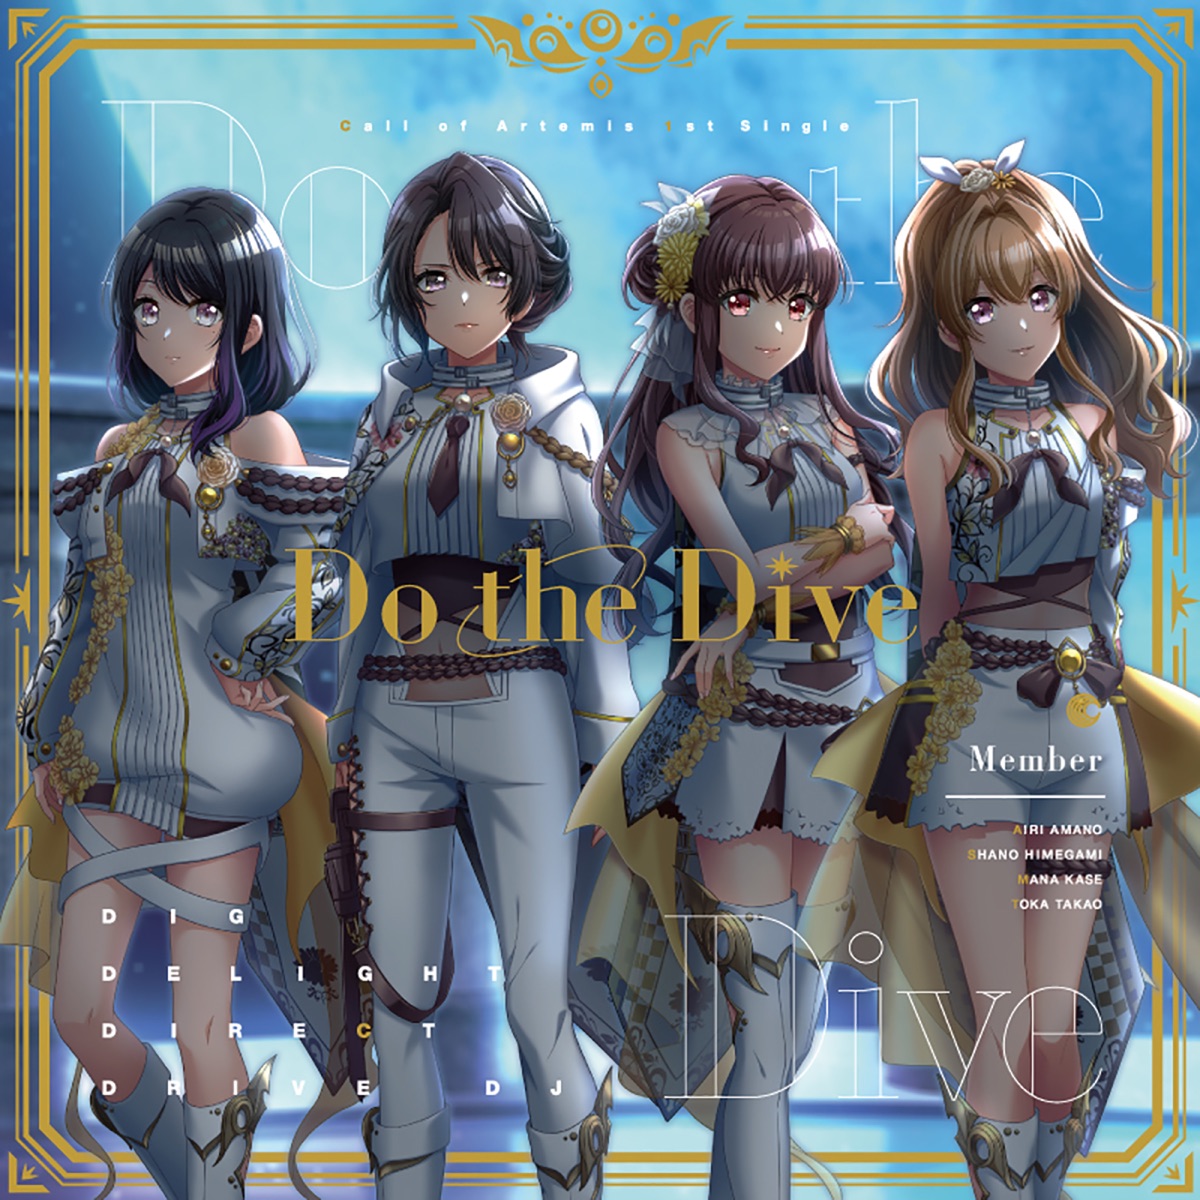 『Call of Artemis - Do the Dive』収録の『Do the Dive』ジャケット